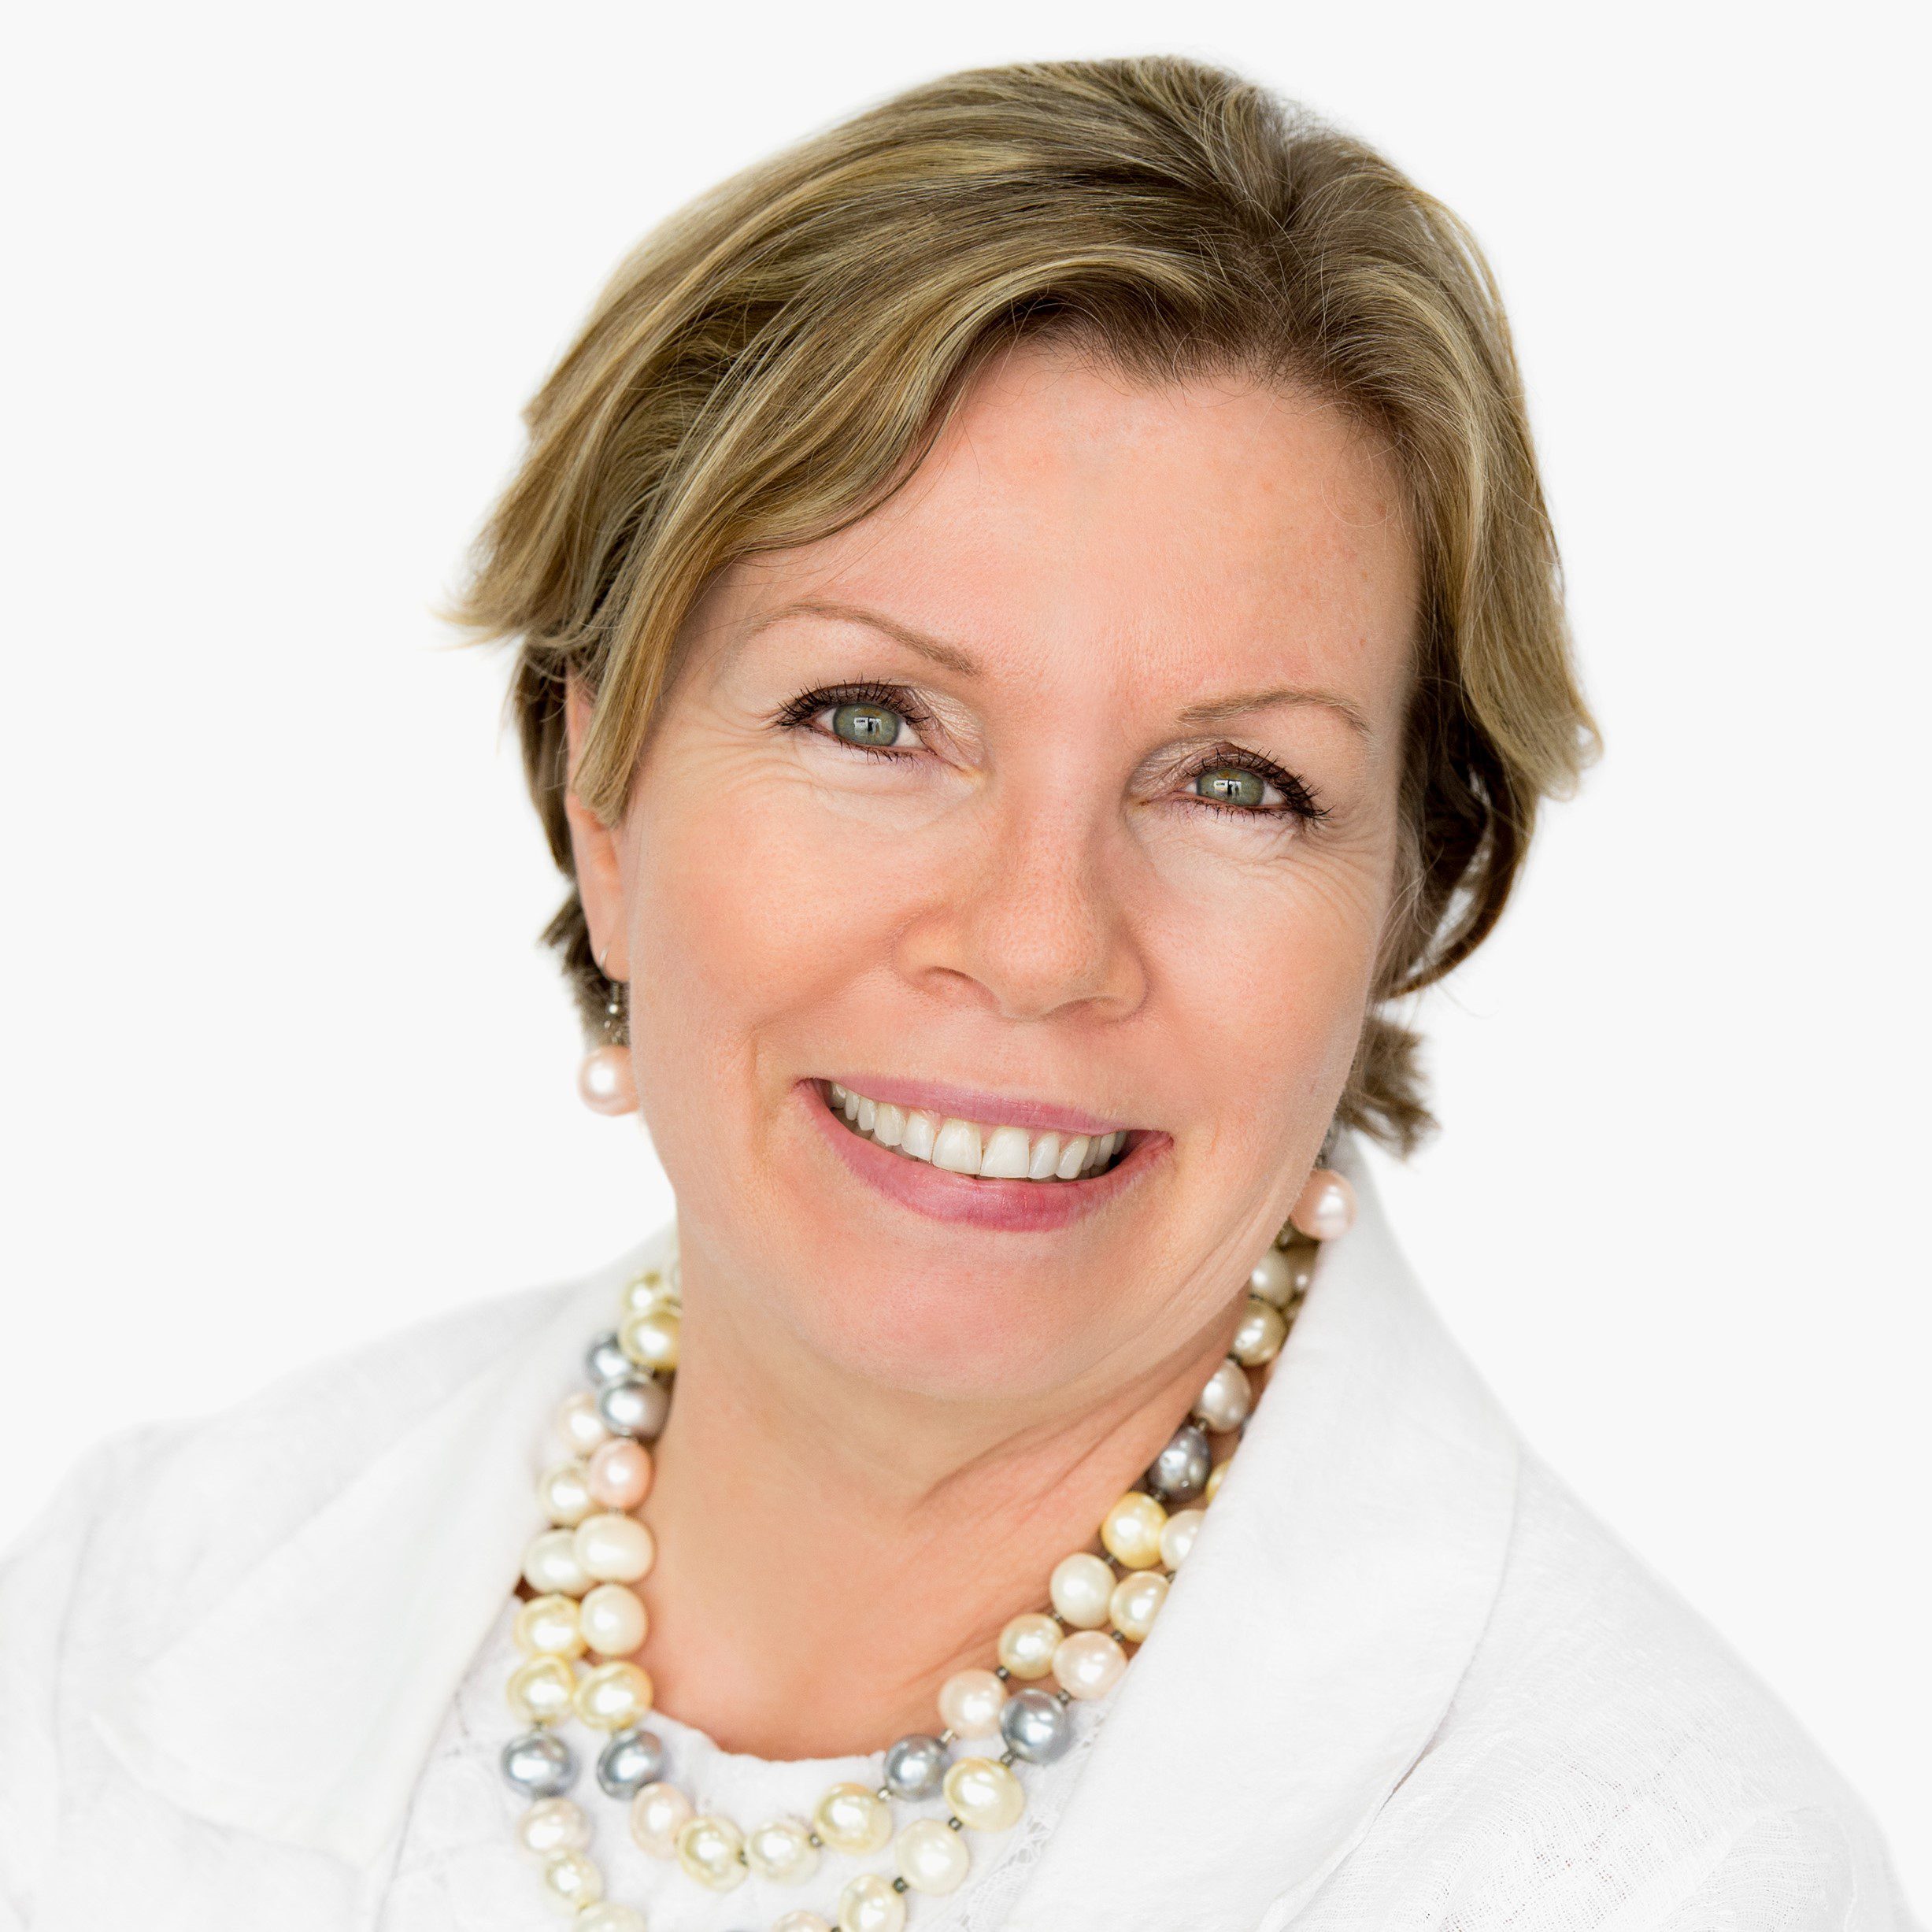 QDN Board member Colleen Papadopoulos, wearing a white shirt and white jacket and necklace, with short light brown hair and smiling at the camera.